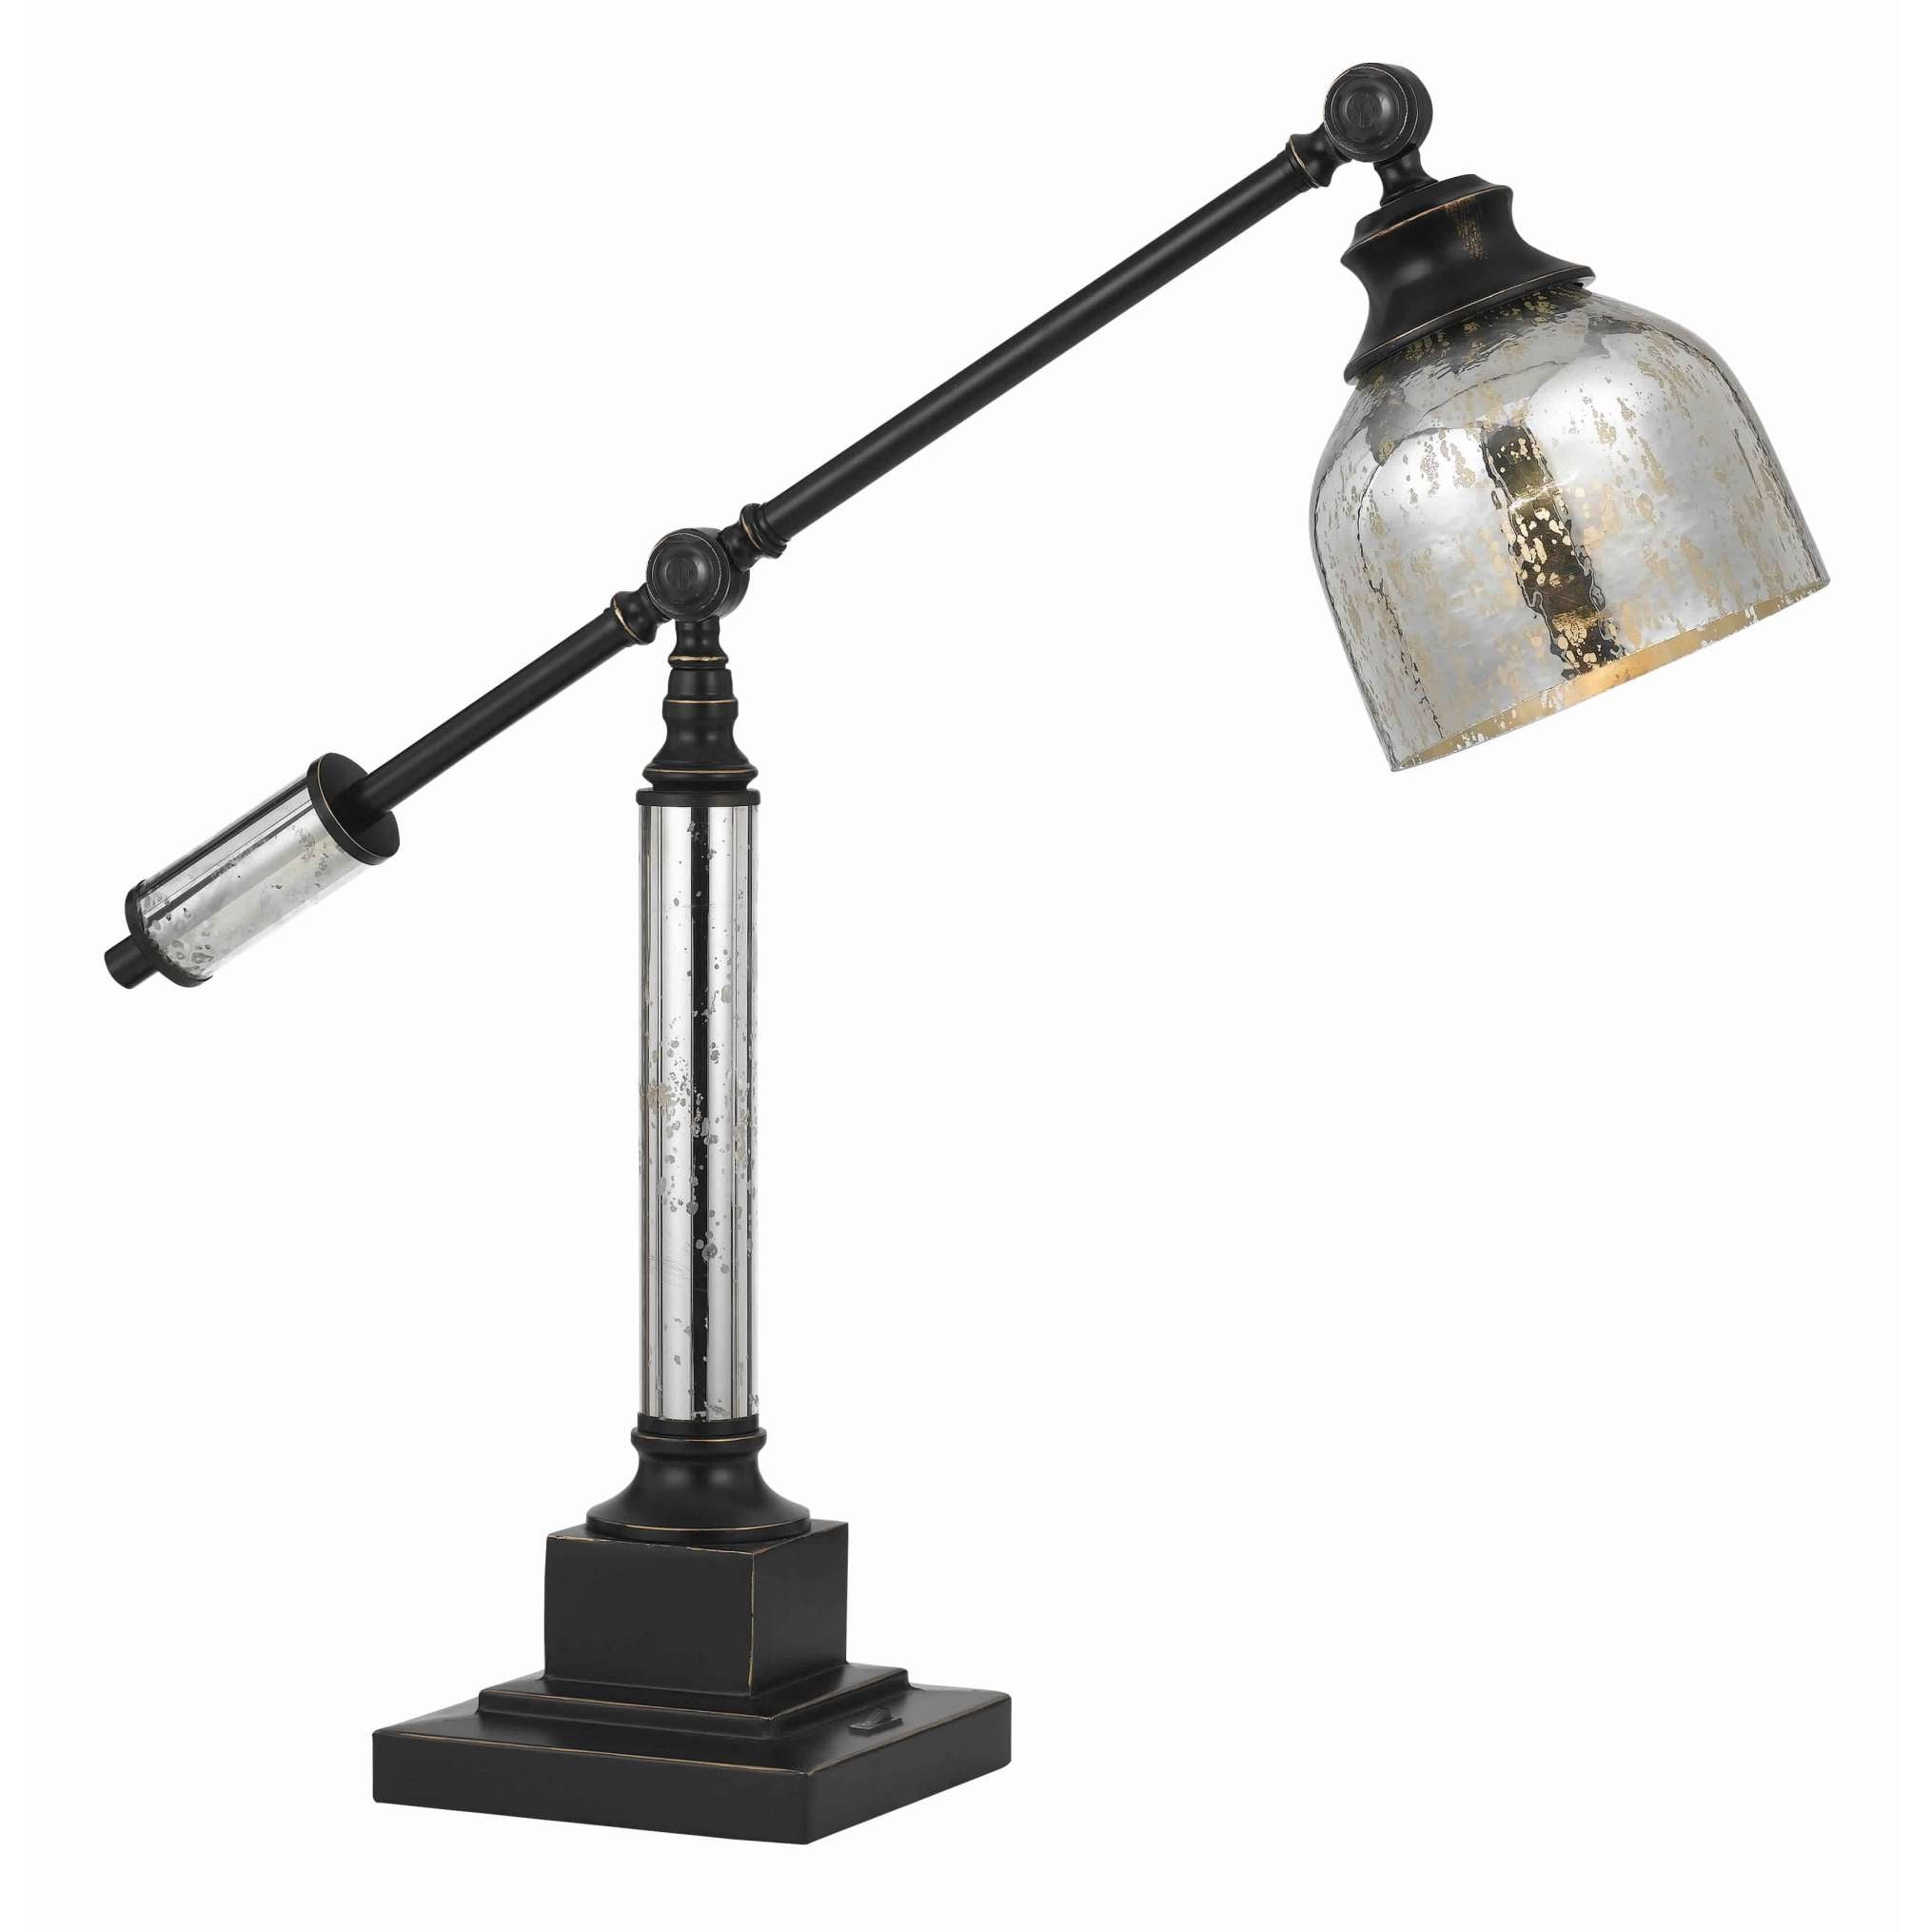 60 Watt Metal Body Table Lamp With Dome Glass Shade, Black And Silver By Benzara